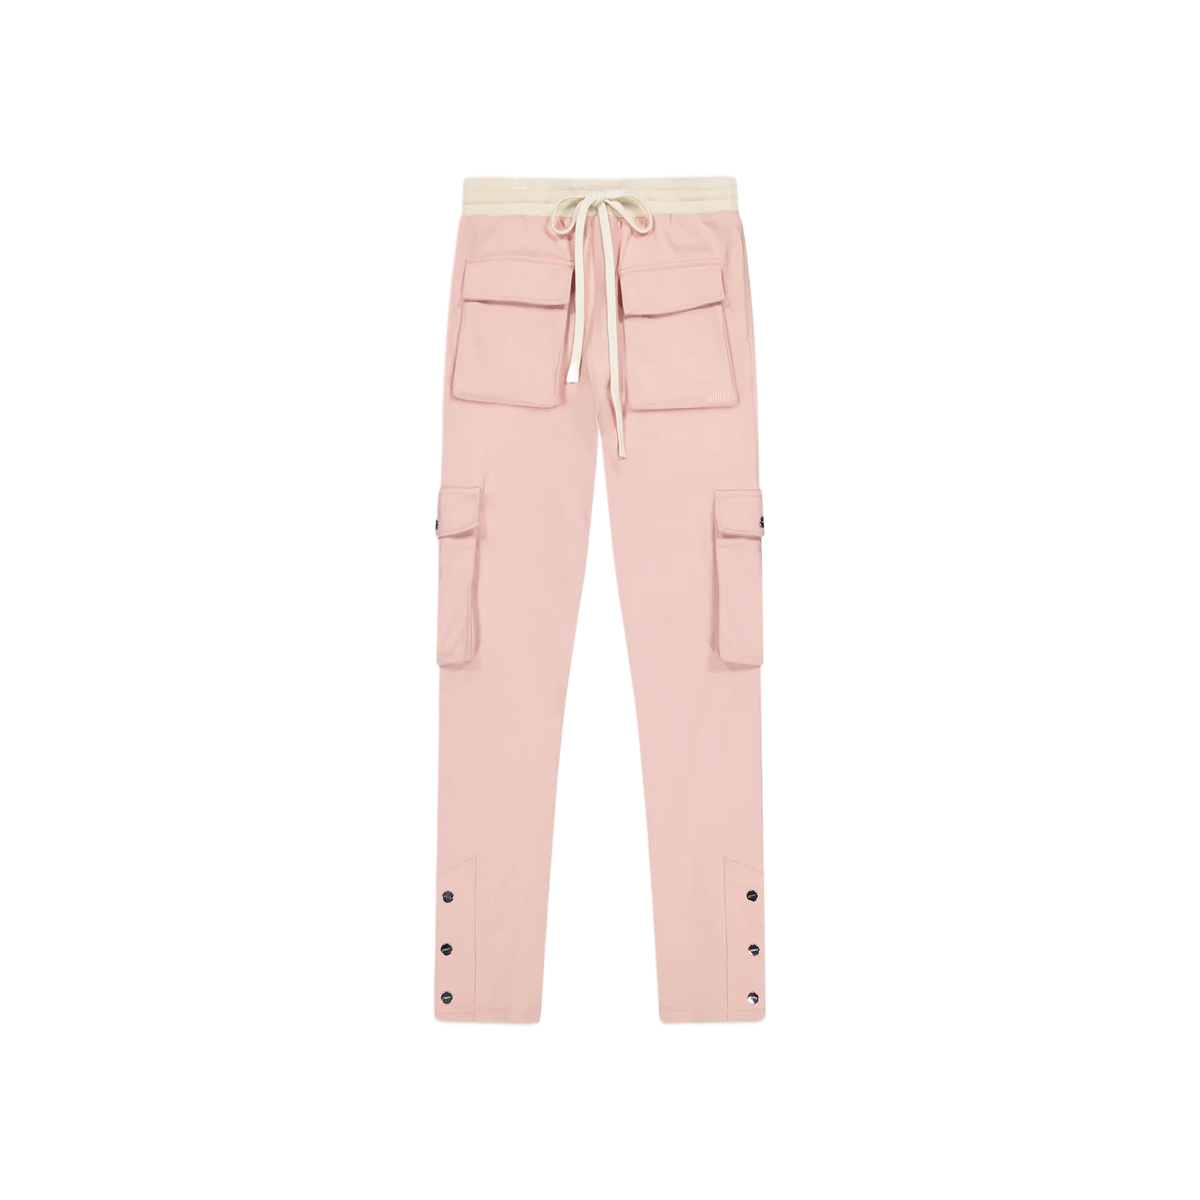 Mouty Pink Cargo Pants